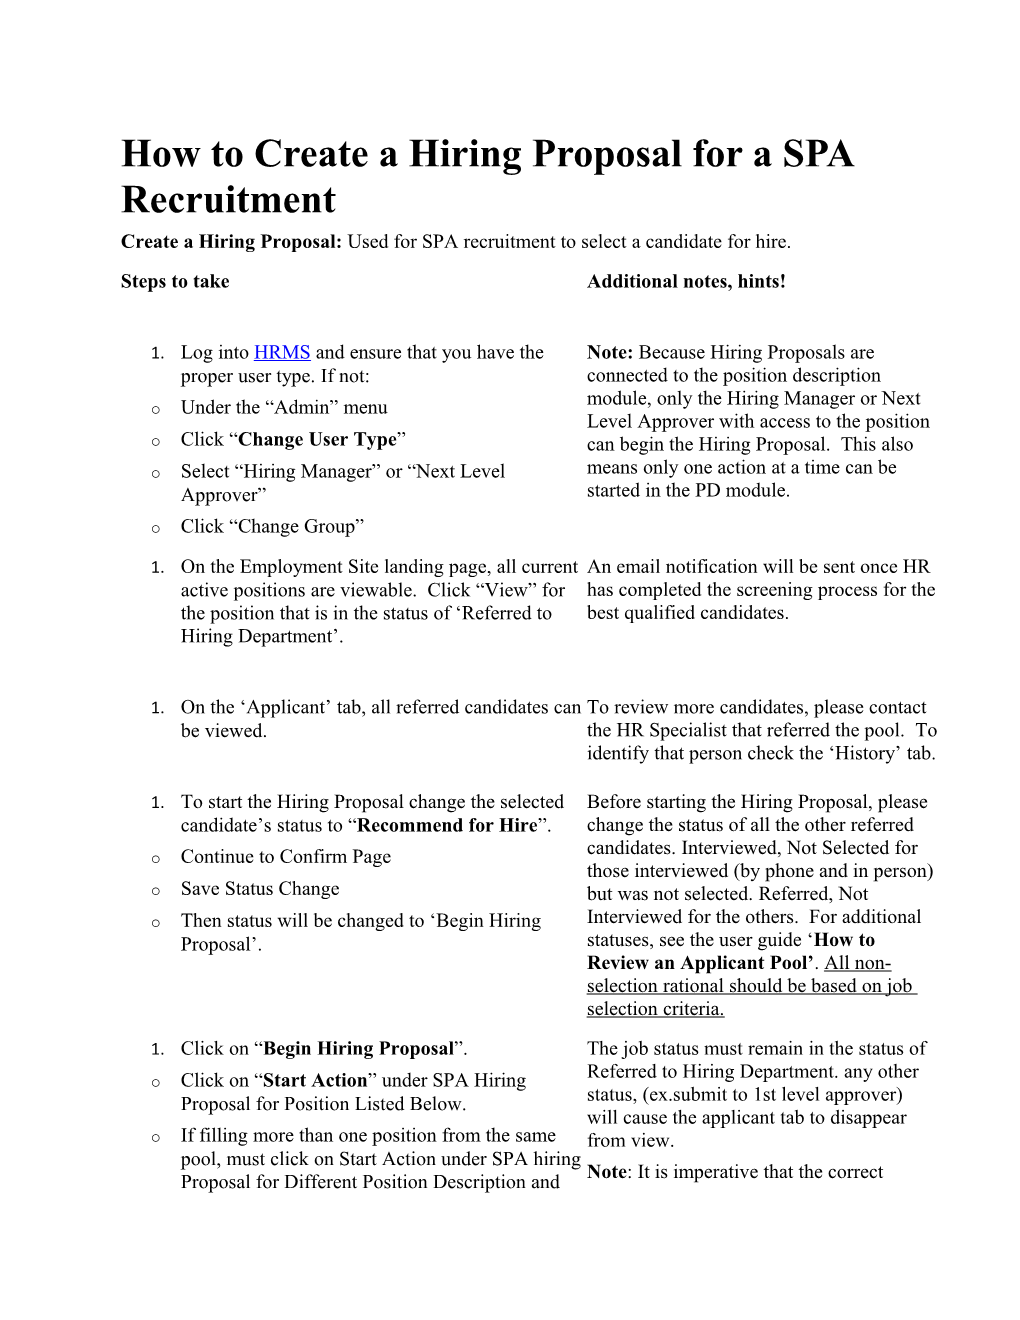 How to Create a Hiring Proposal for a SPA Recruitment